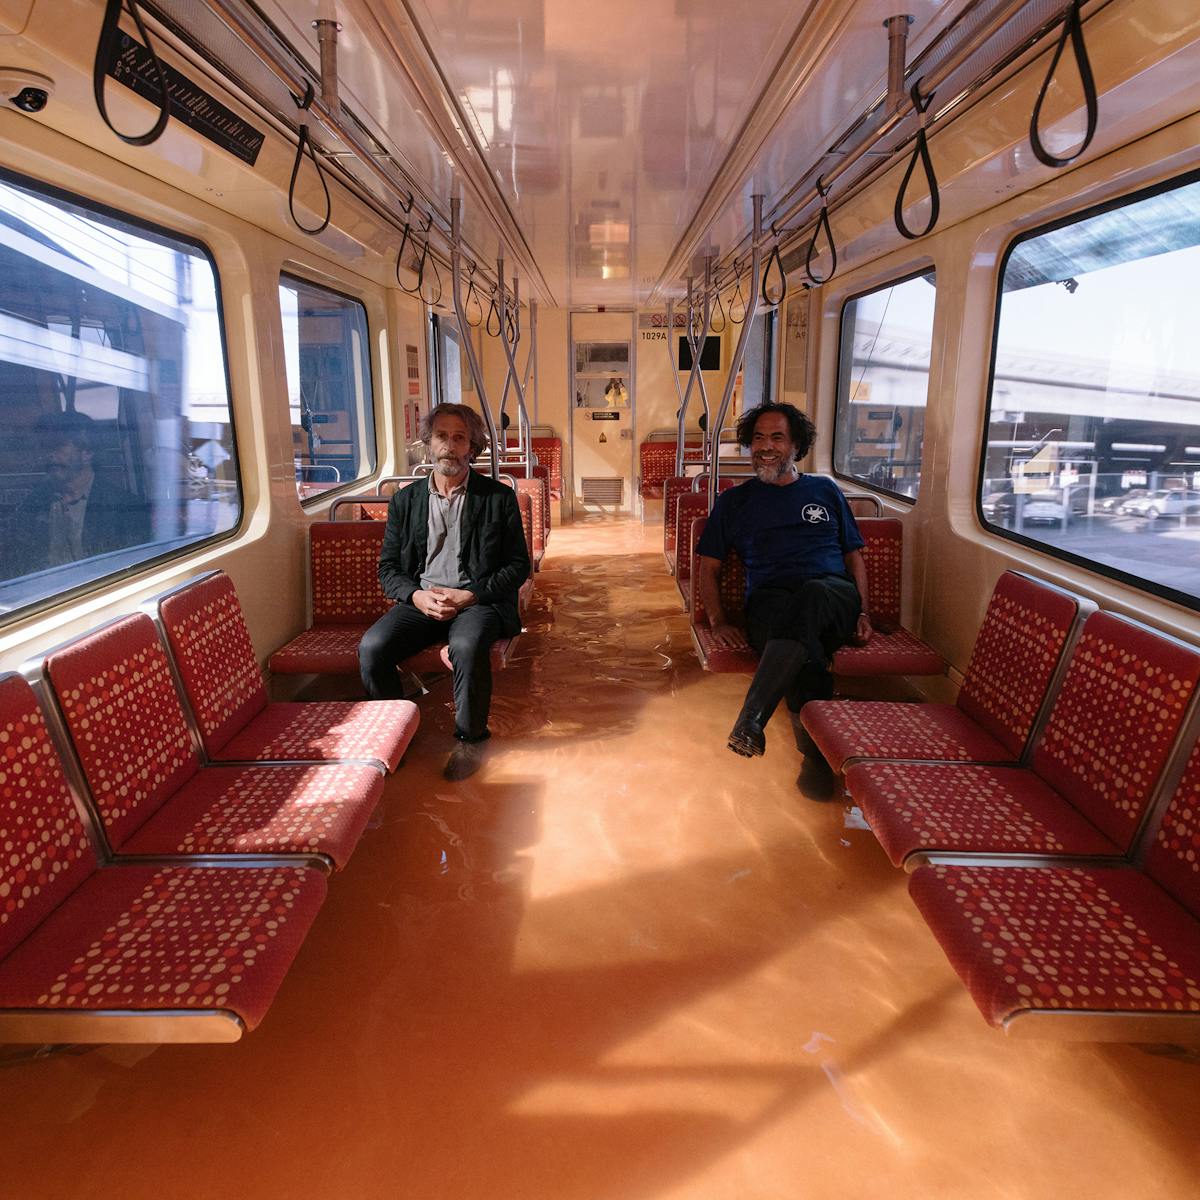 Daniel Giménez Cacho and Alejandro G. Iñárritu sit in a bus lined with red cushioned benches.